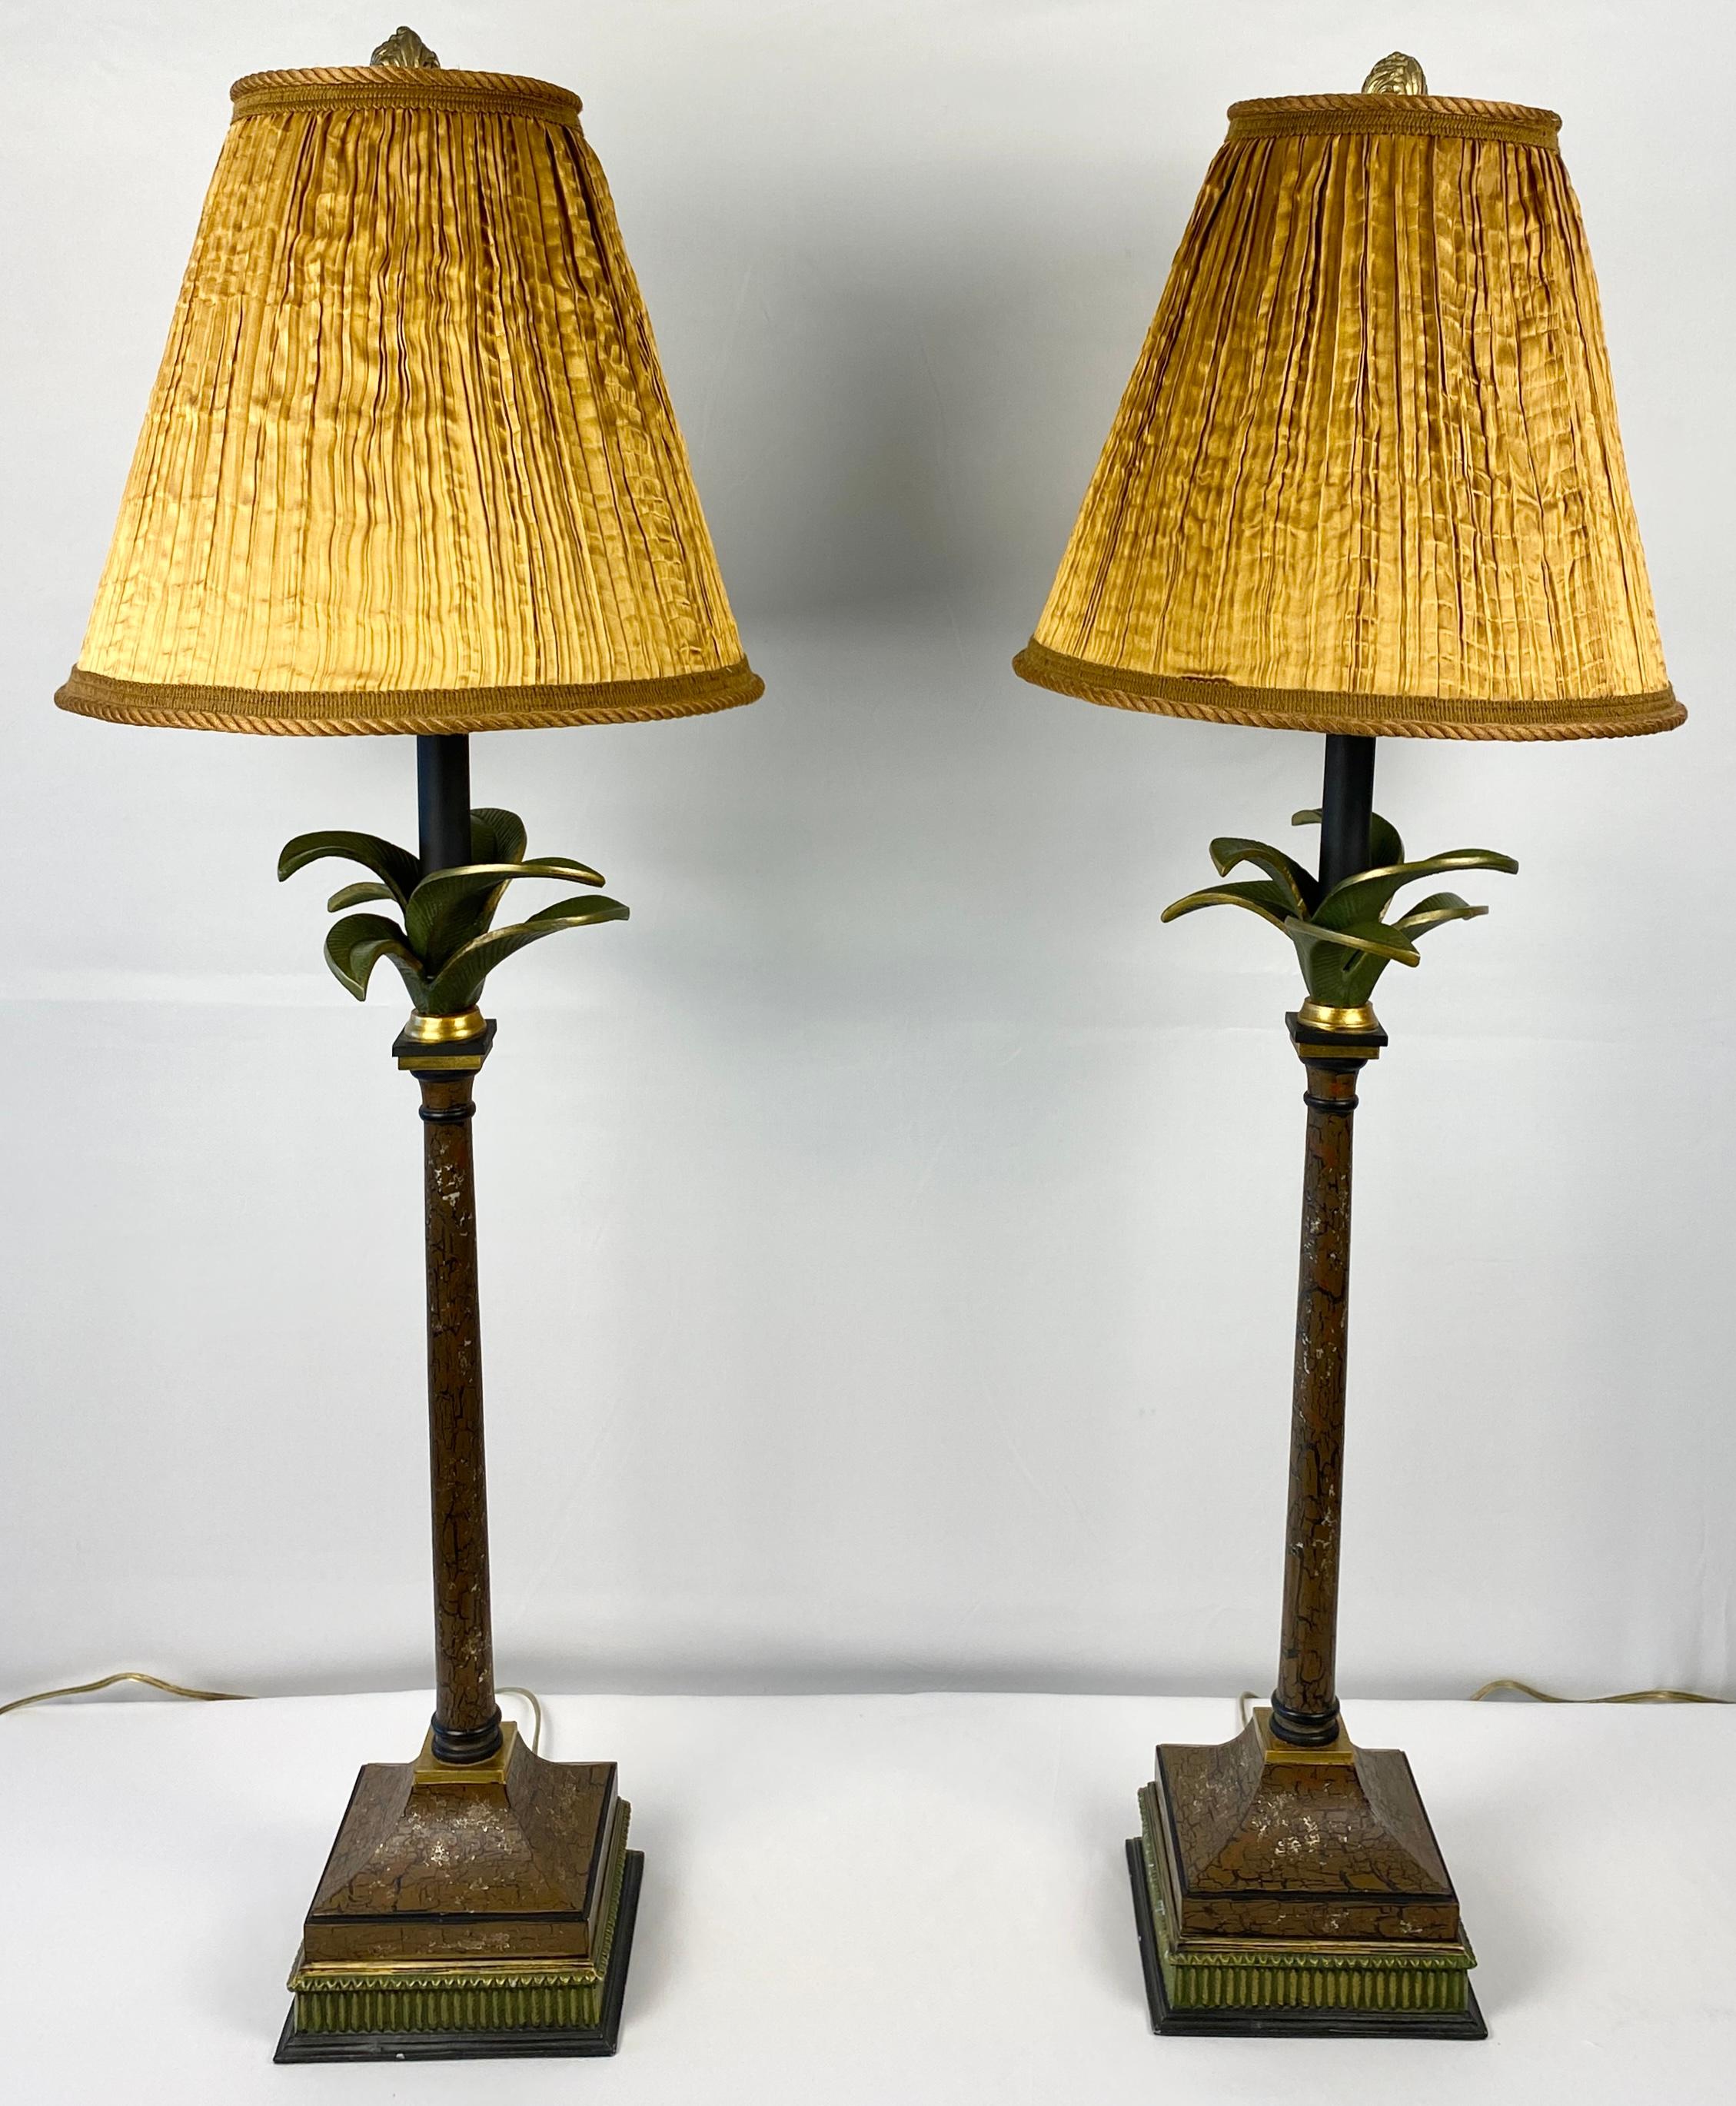 Pair of midcentury Palm Tree Table Lamps stylized and painted in earthy colors and having dynamic decorative appeal.

This stylish pair of midcentury palm tree table lamps would enhance any traditional, contemporary, midcentury, modern, country